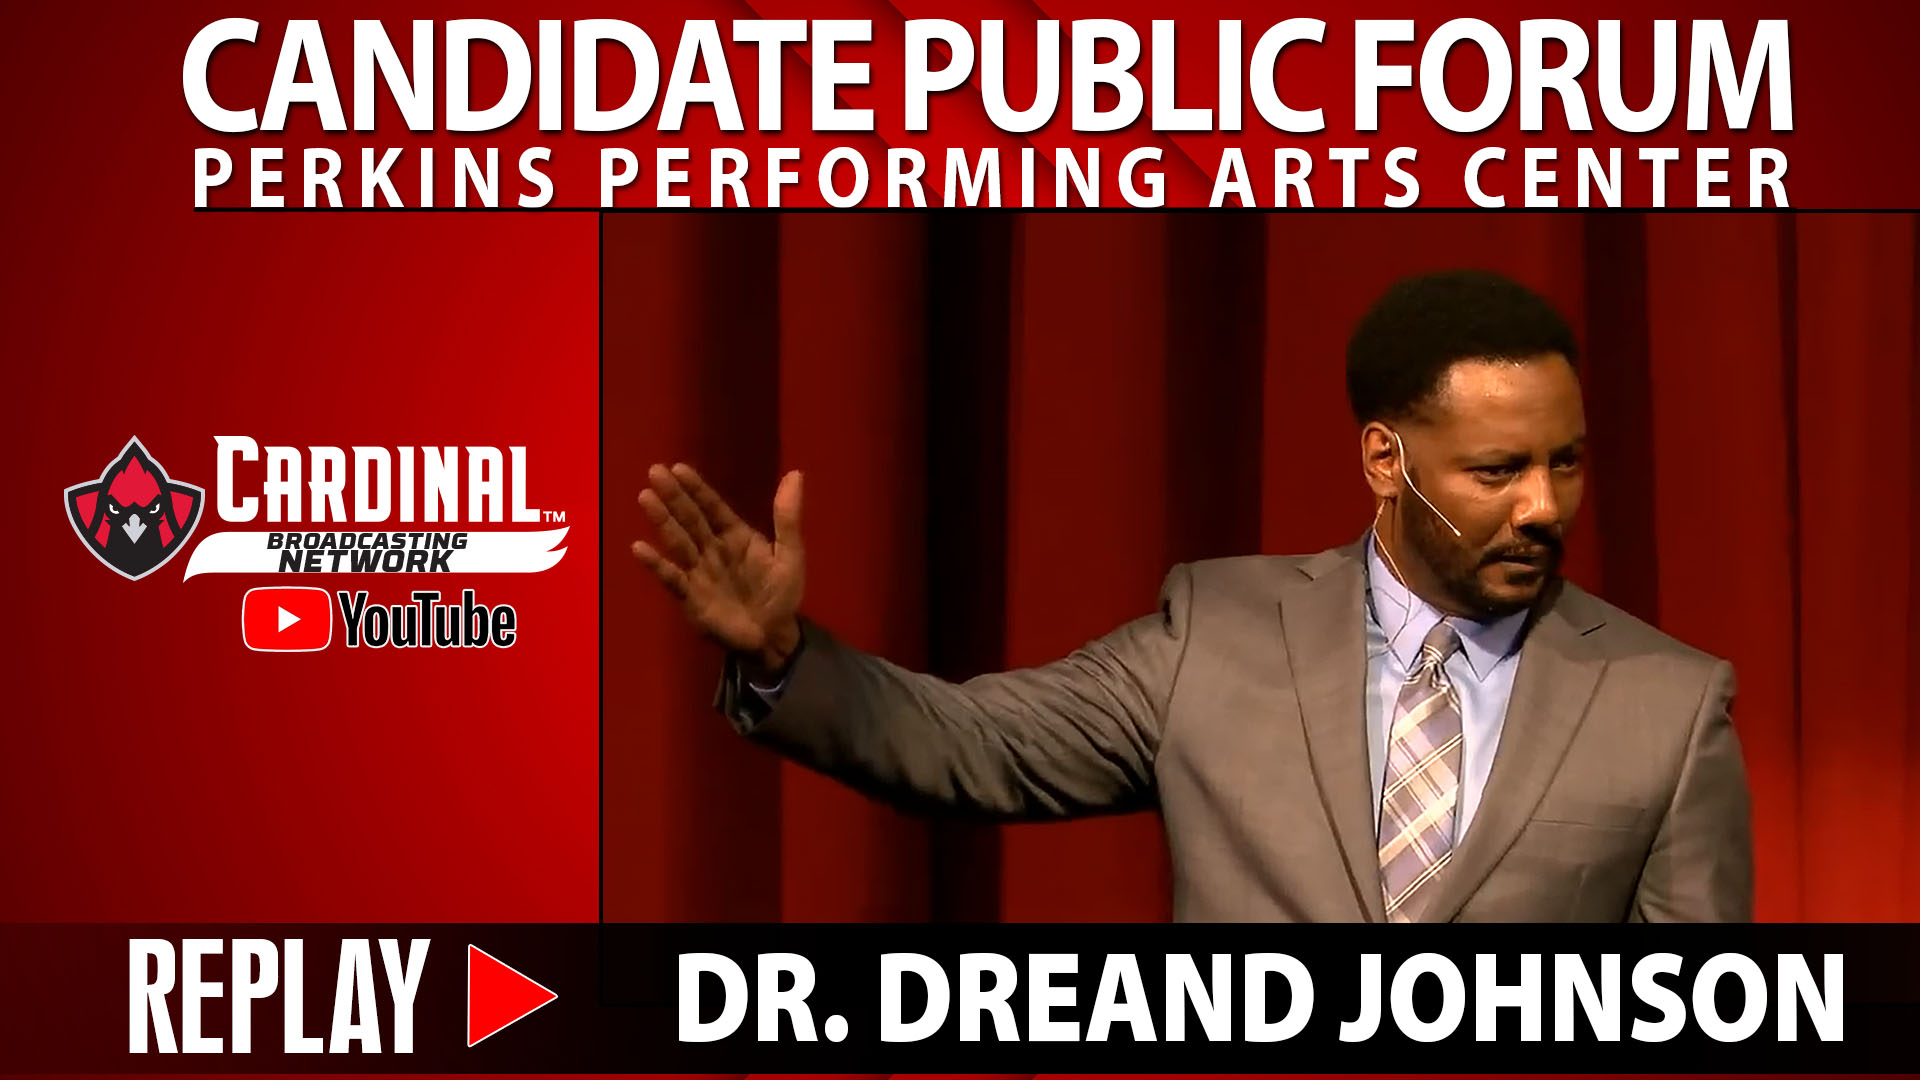 Candidate Public Forum - Perkins Performing Arts Center - Replay - Dr. Dreand Johnson